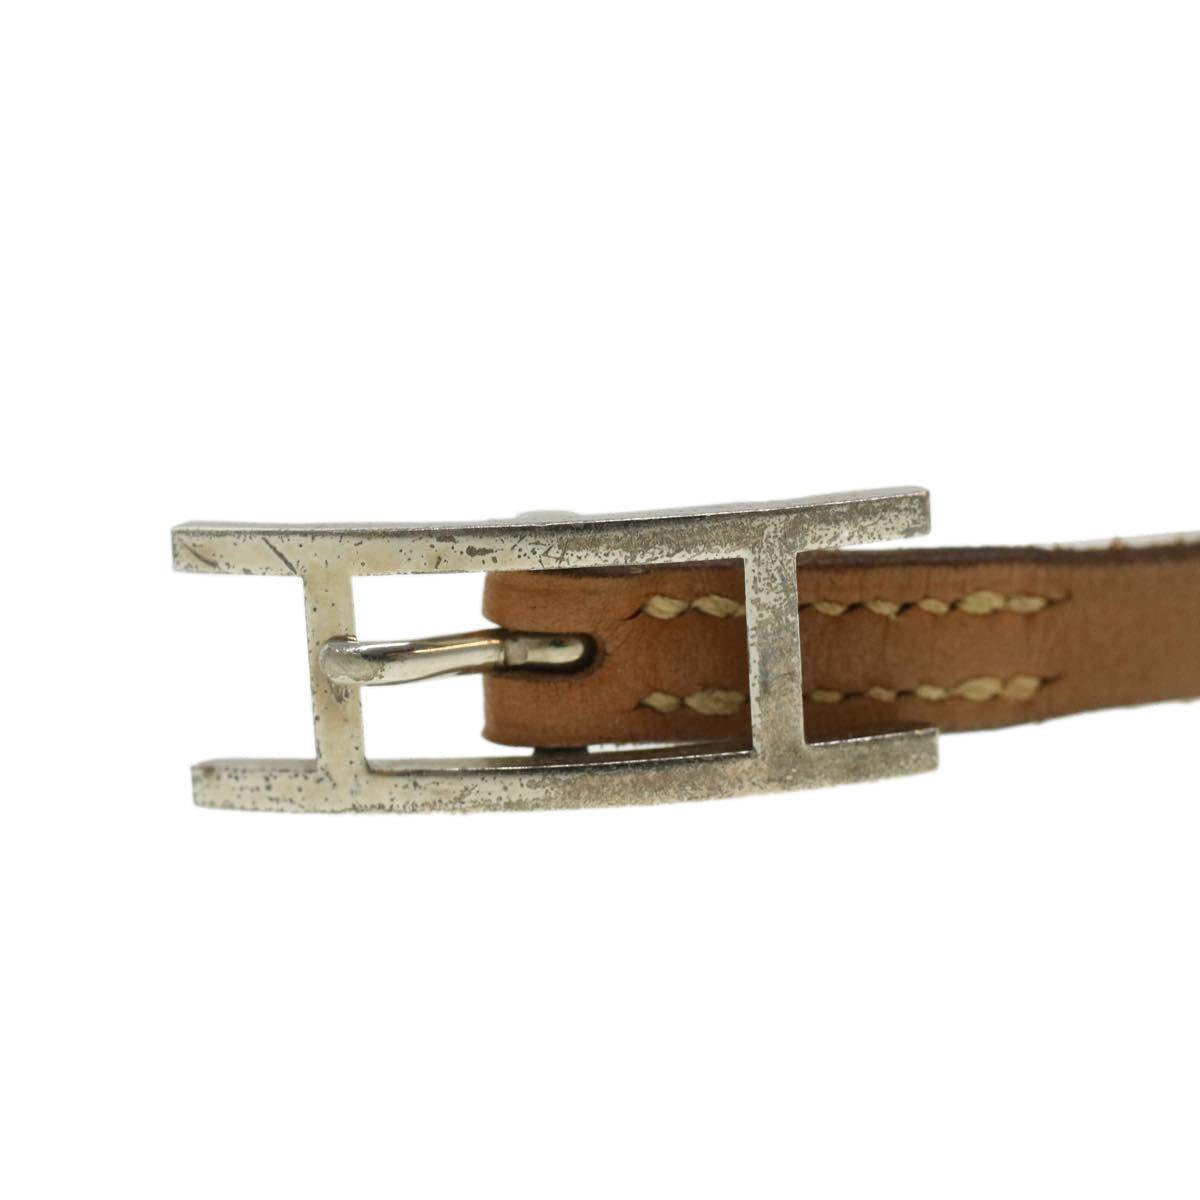 HERMES Strap Leather Beige Auth ar8382